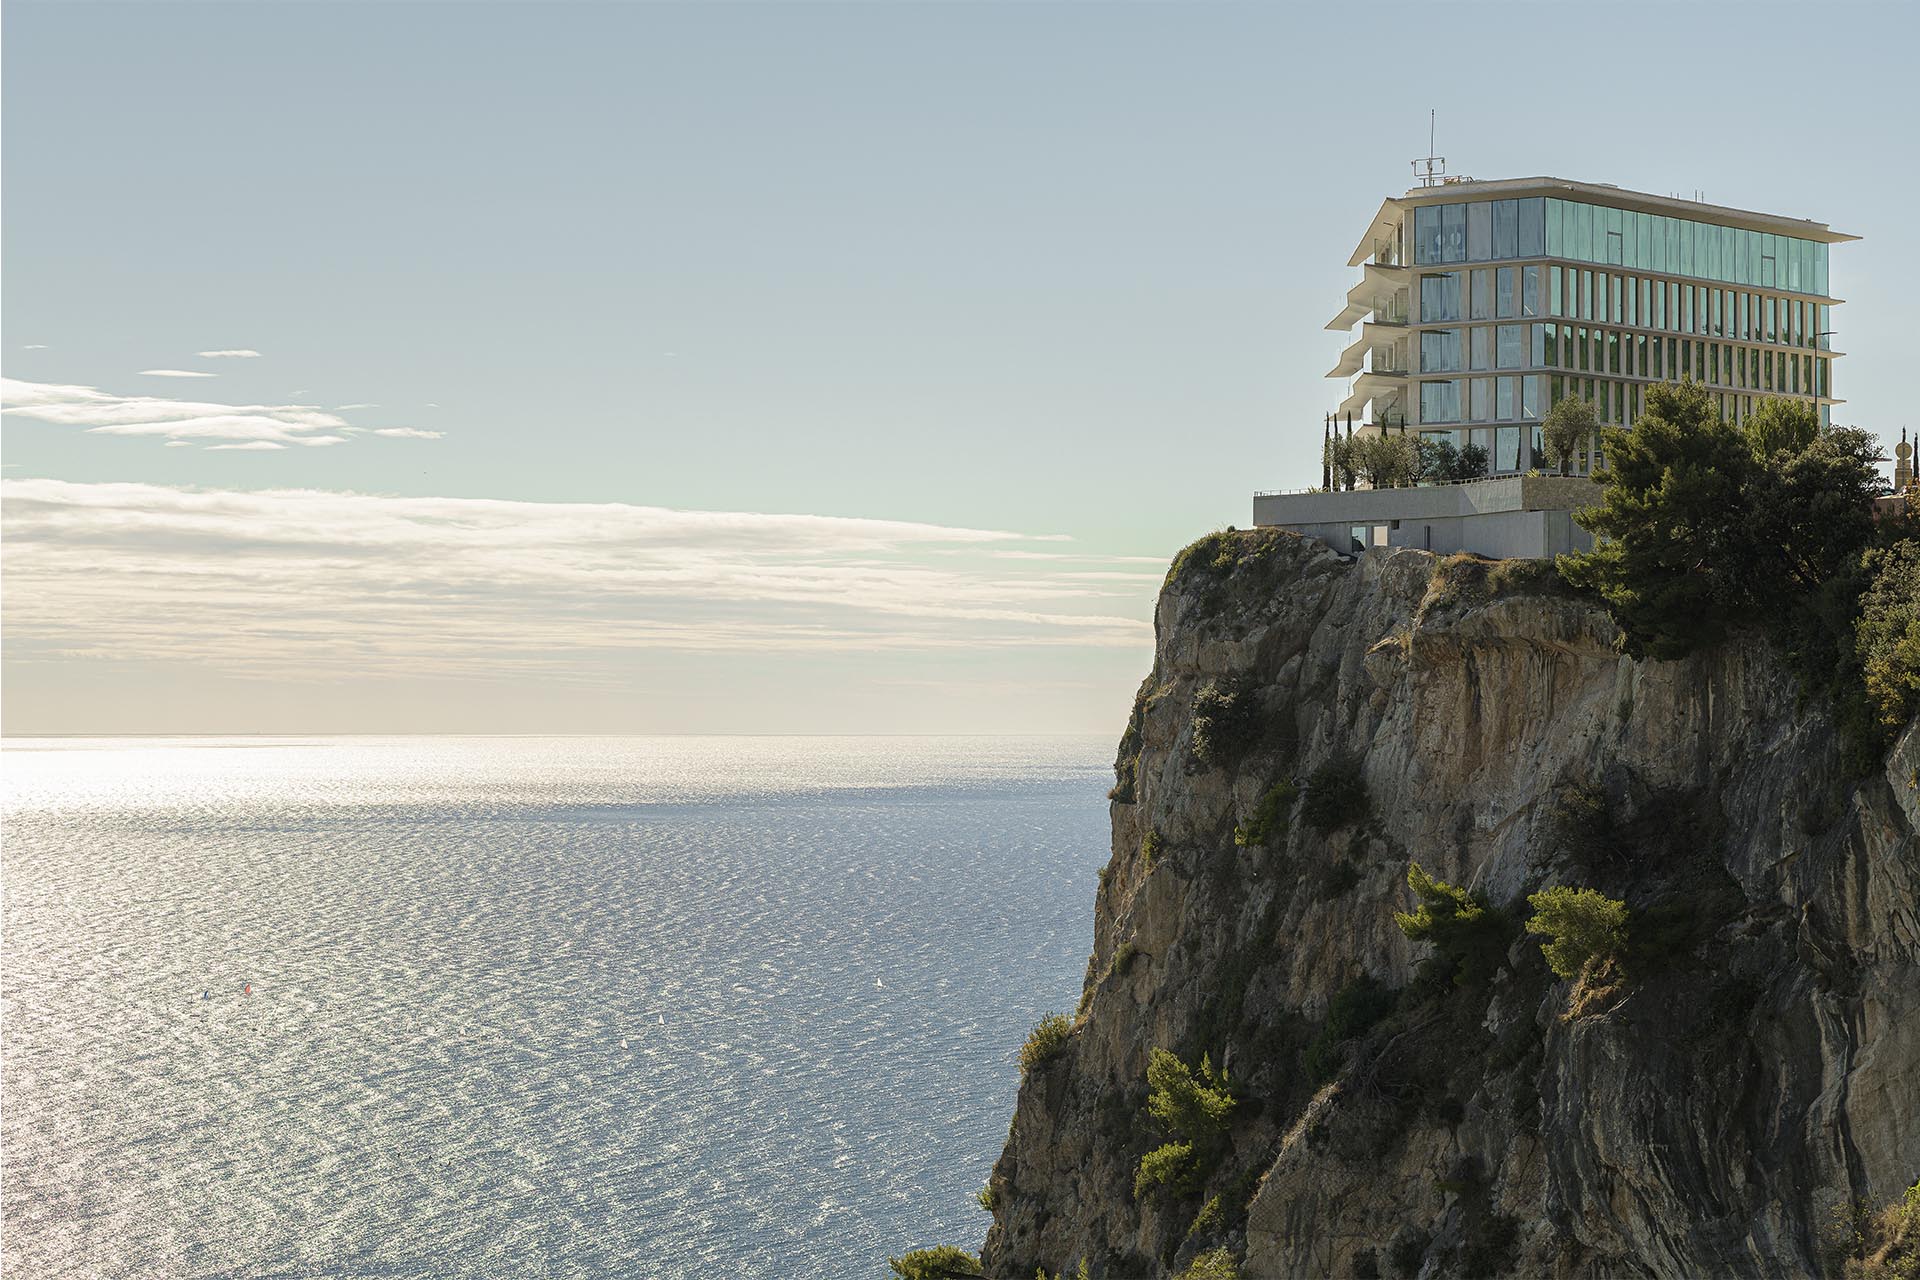  The Maybourne Riviera: a white, mineral and graphic hotel open to the nature of Côte d'Azur  